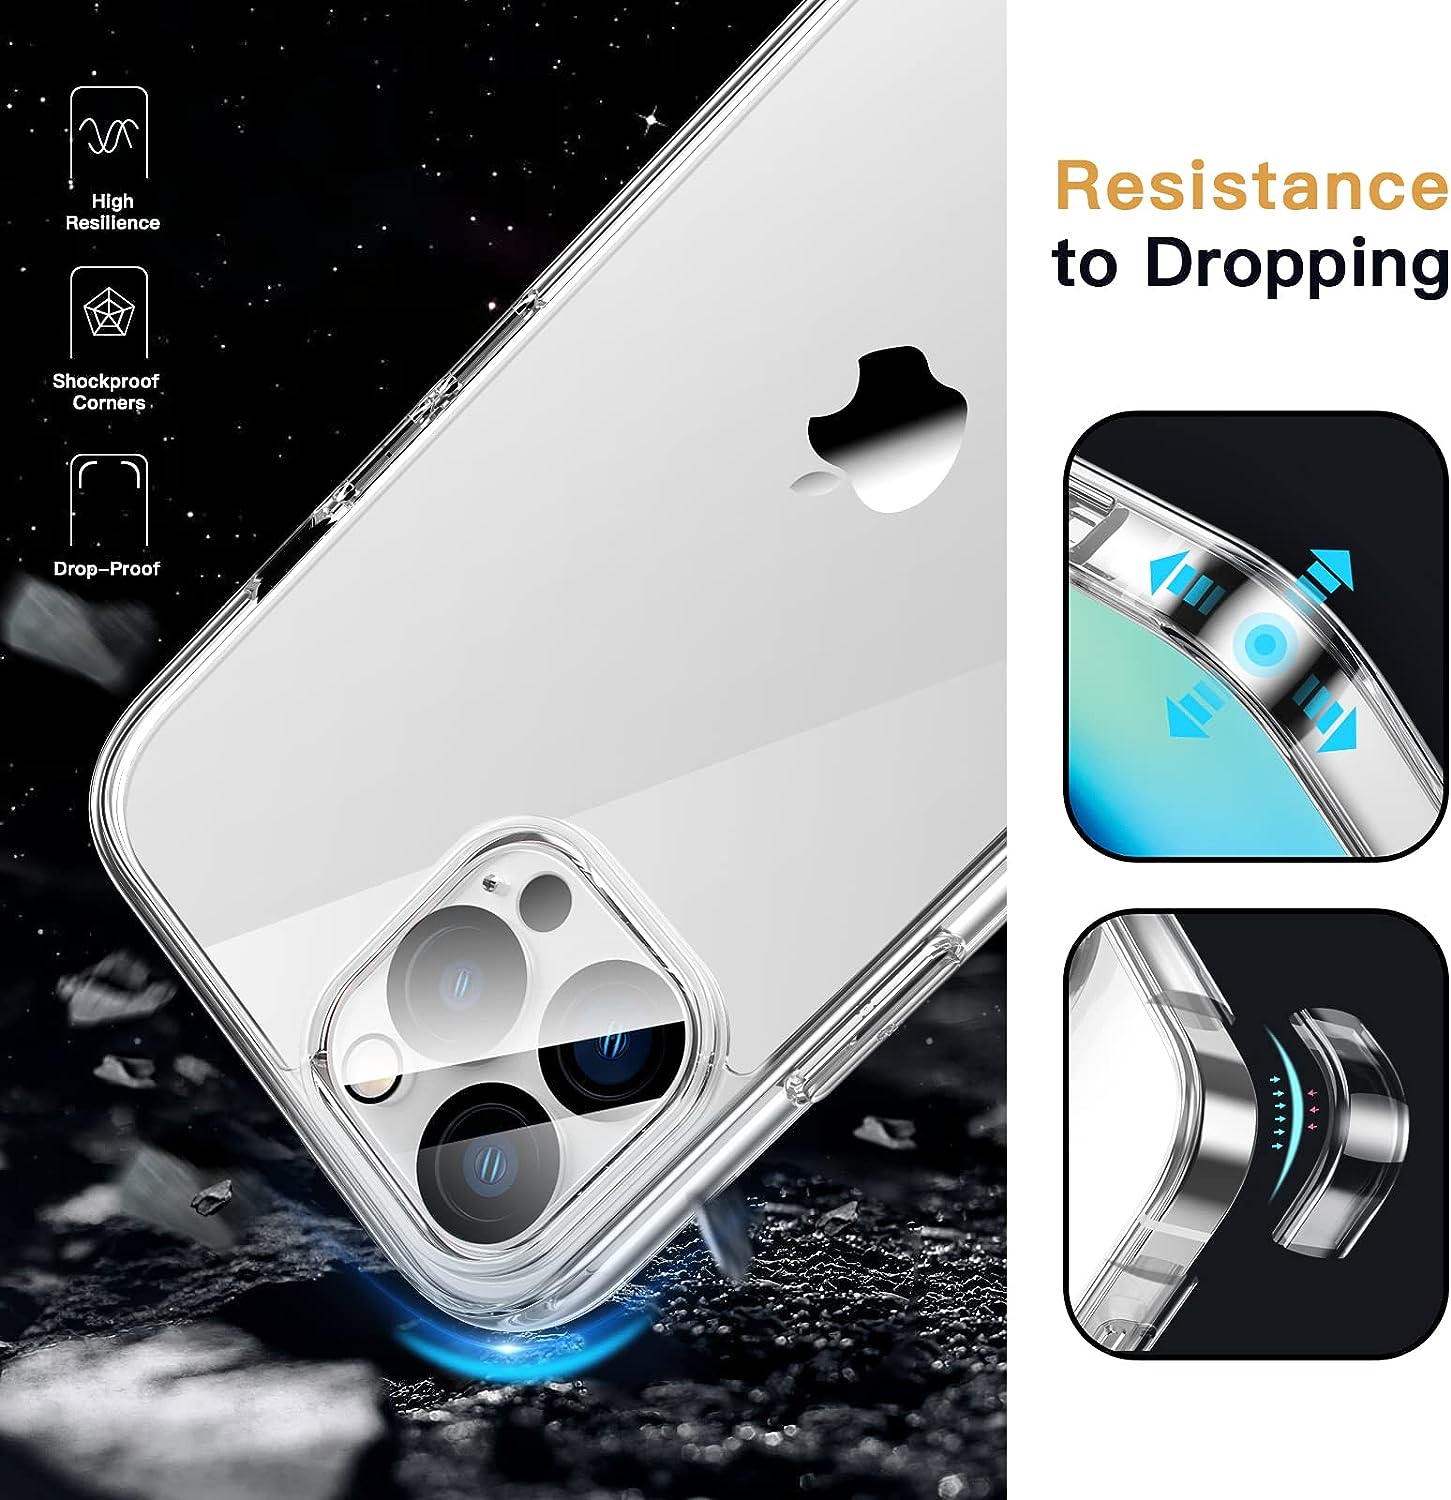 3 in 1 Combo - Case, Screen Protector & Camera Lens Protector for iPhone 12 Pro *Free Shipping*